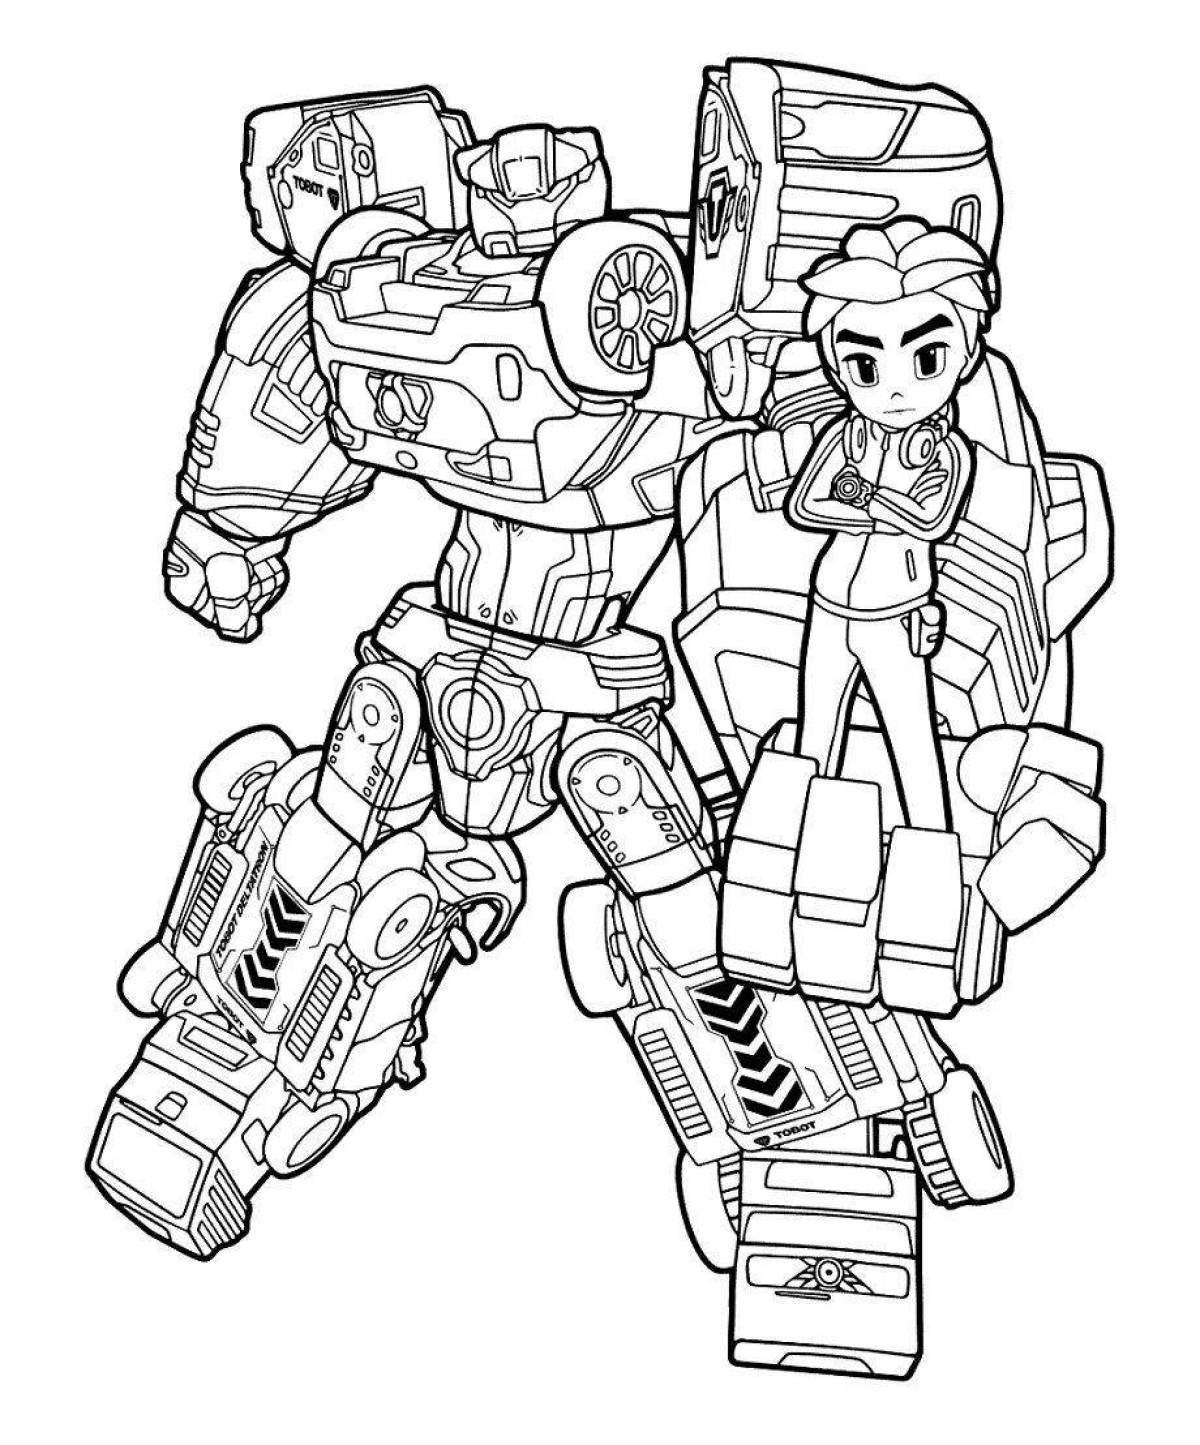 Coloring page fascinating tobot boys